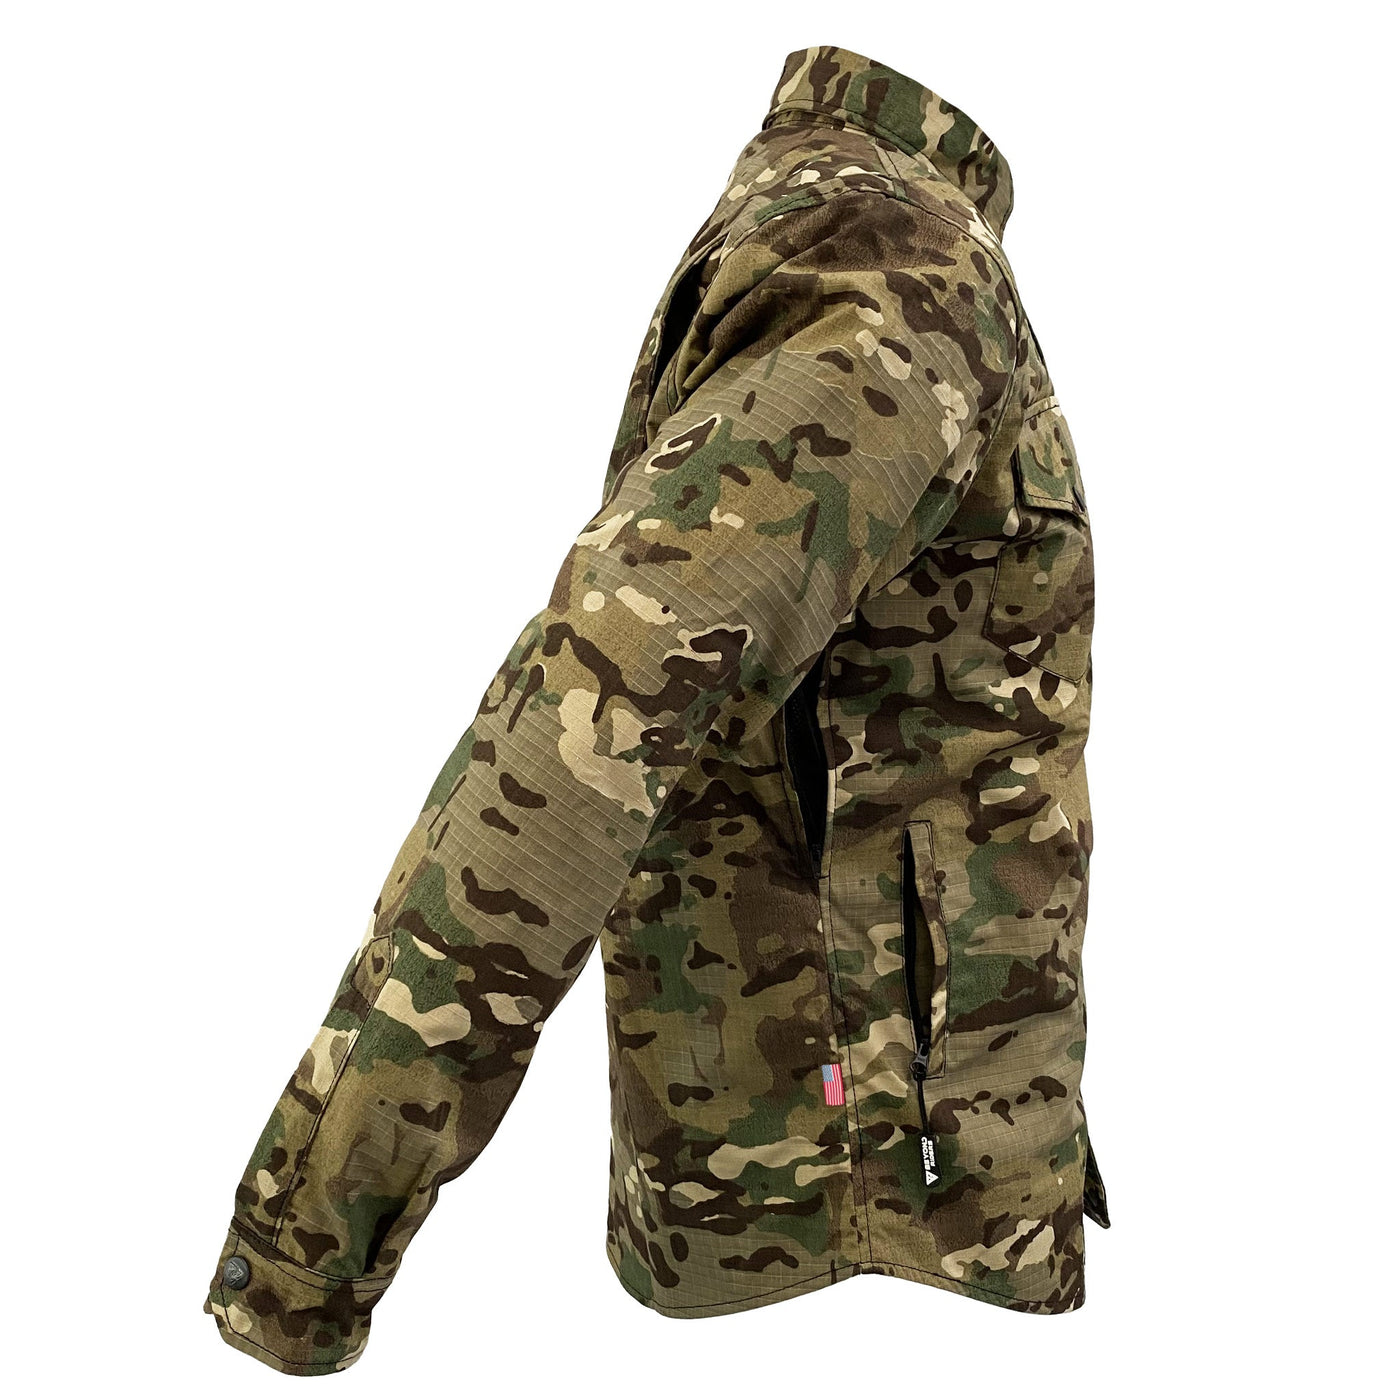 Protective Camouflage Shirt with Pads "Delta Four" - Light Color